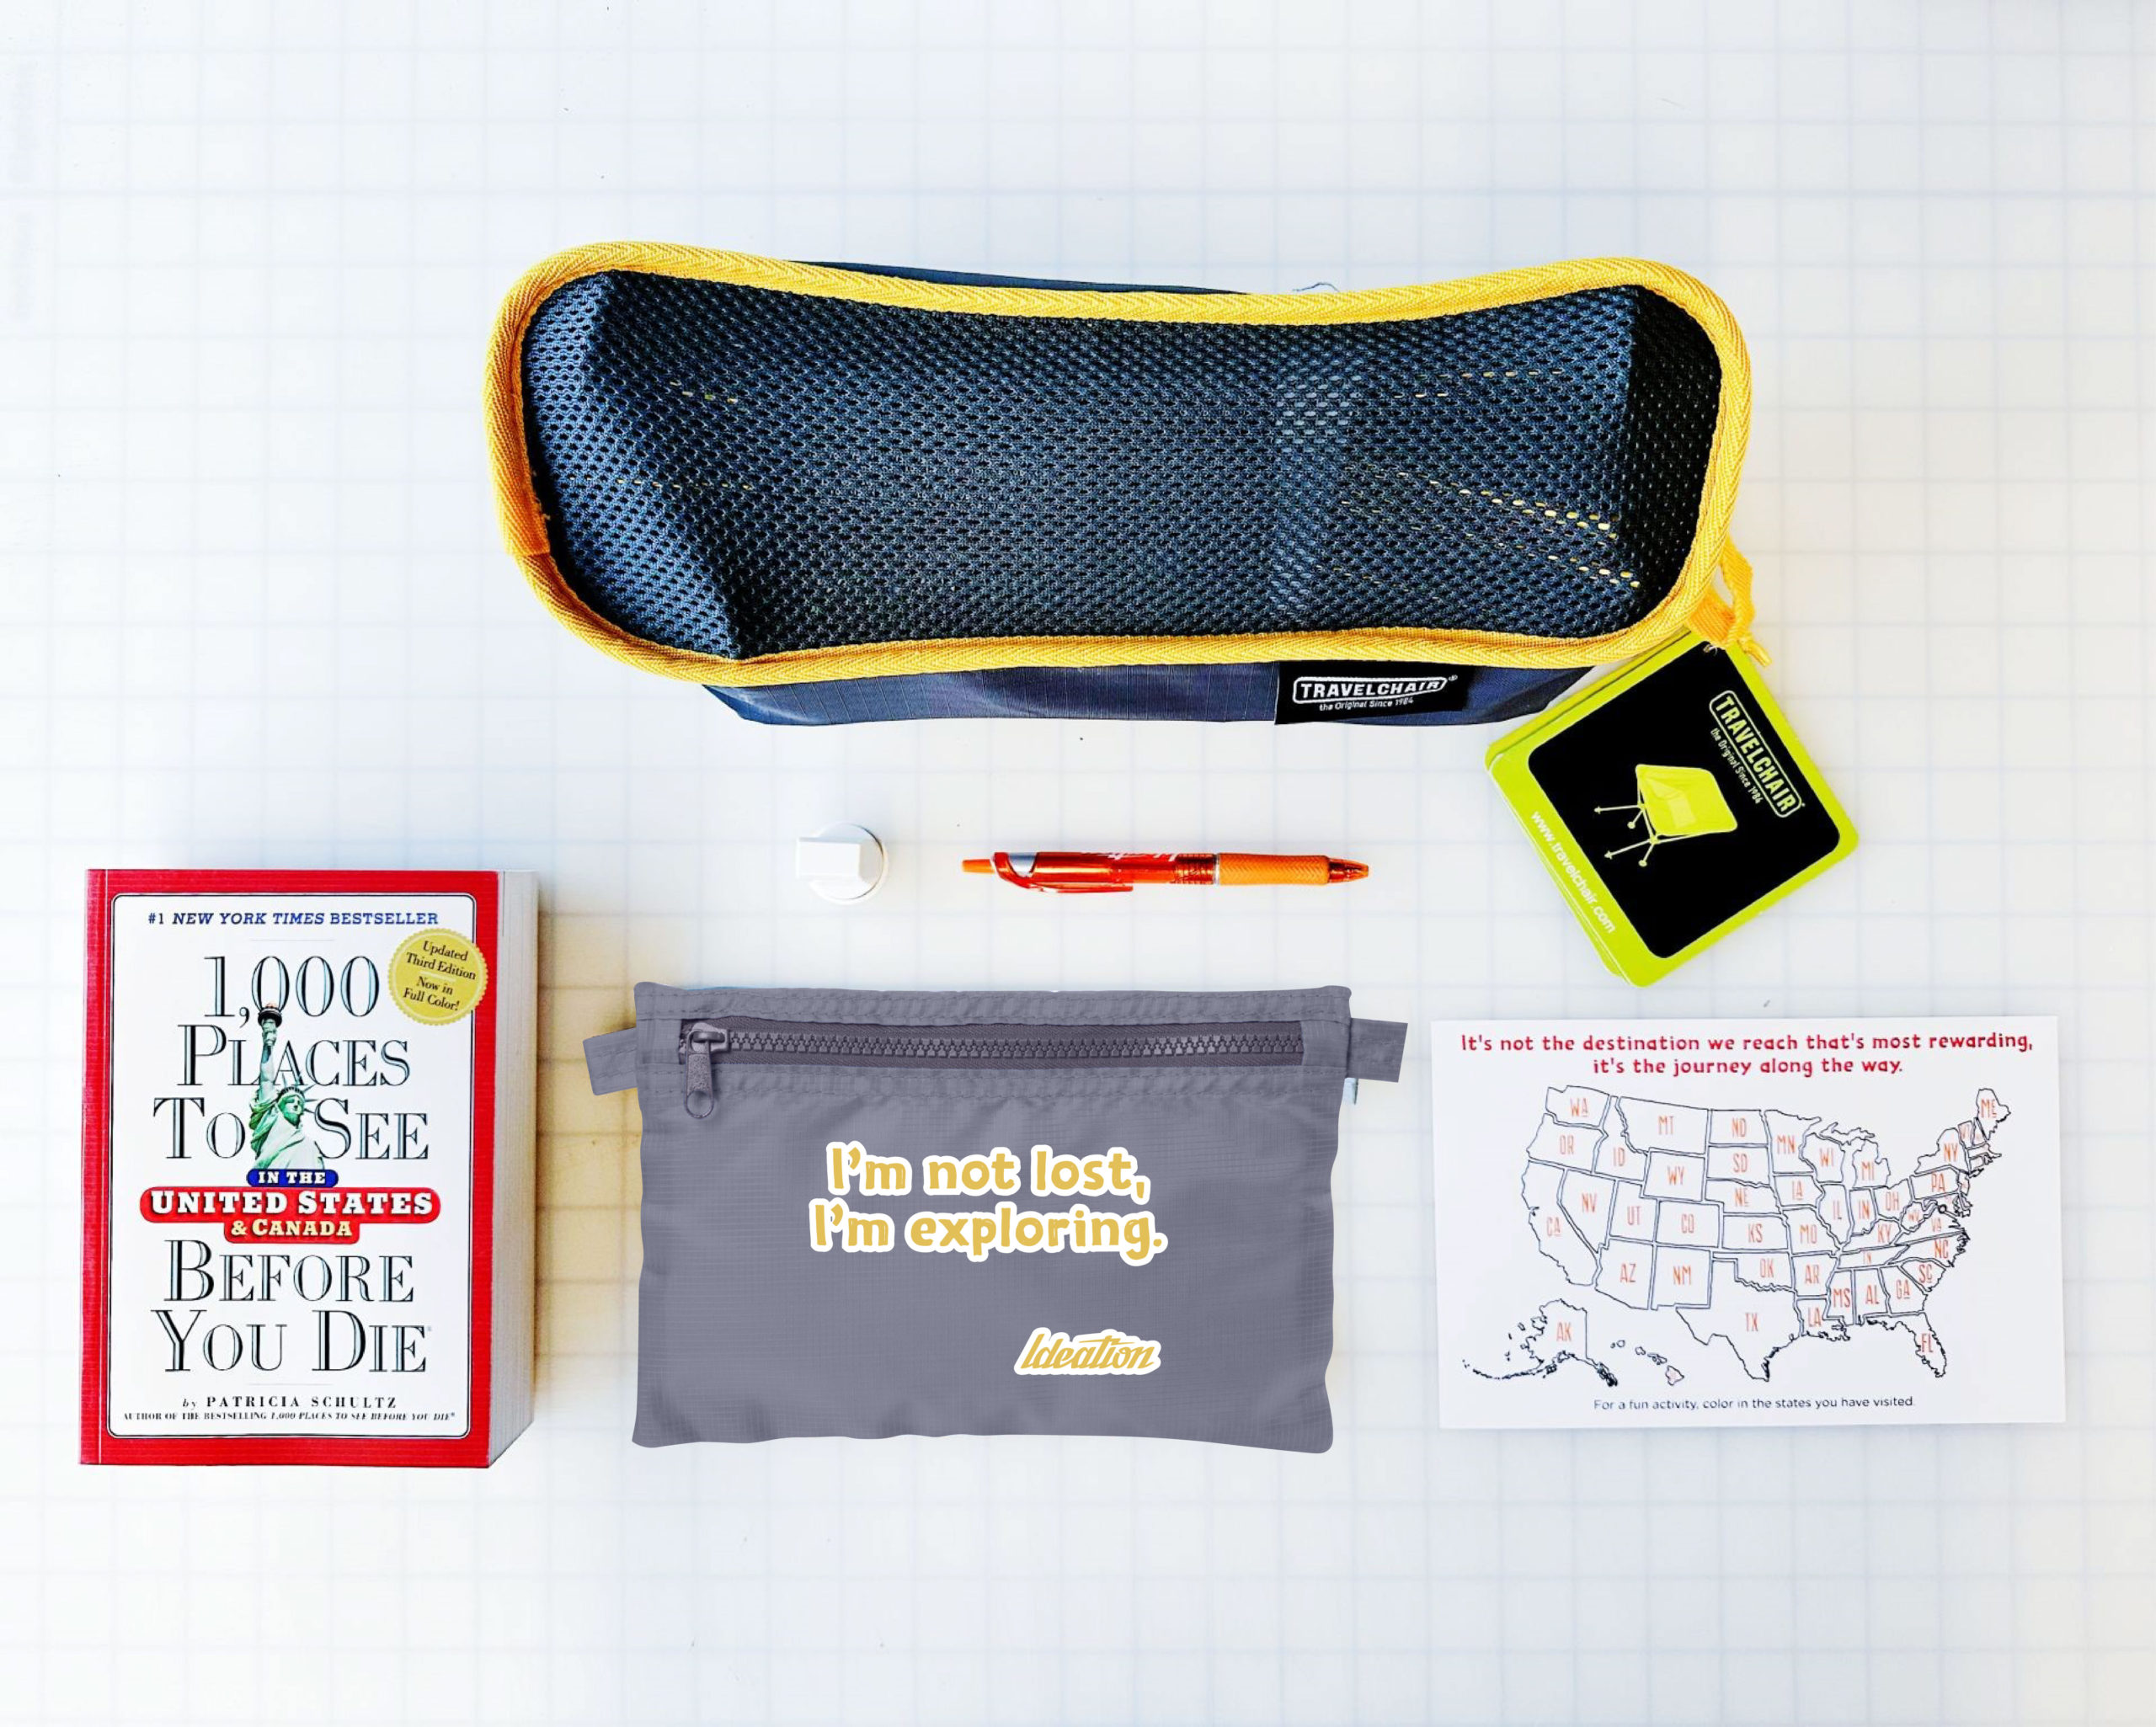 On the Road Again: Ideation’s Journey-Inspired Box of Branded Merchandise